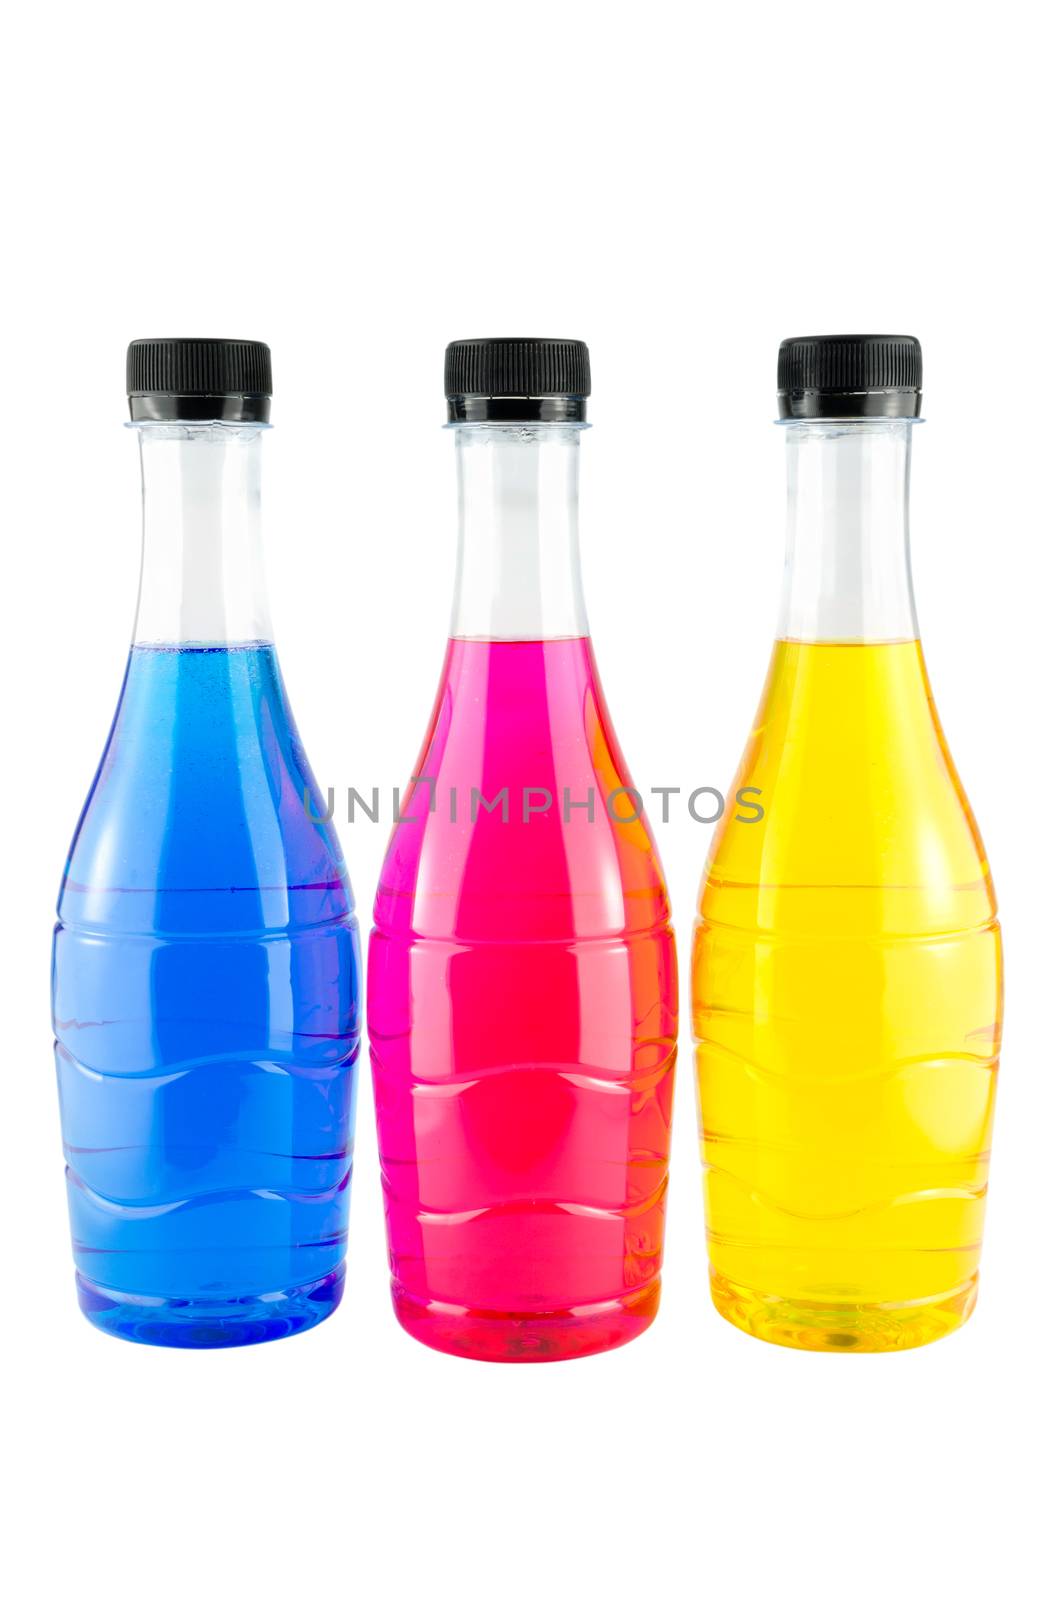 Bright colorful bottles by nop16